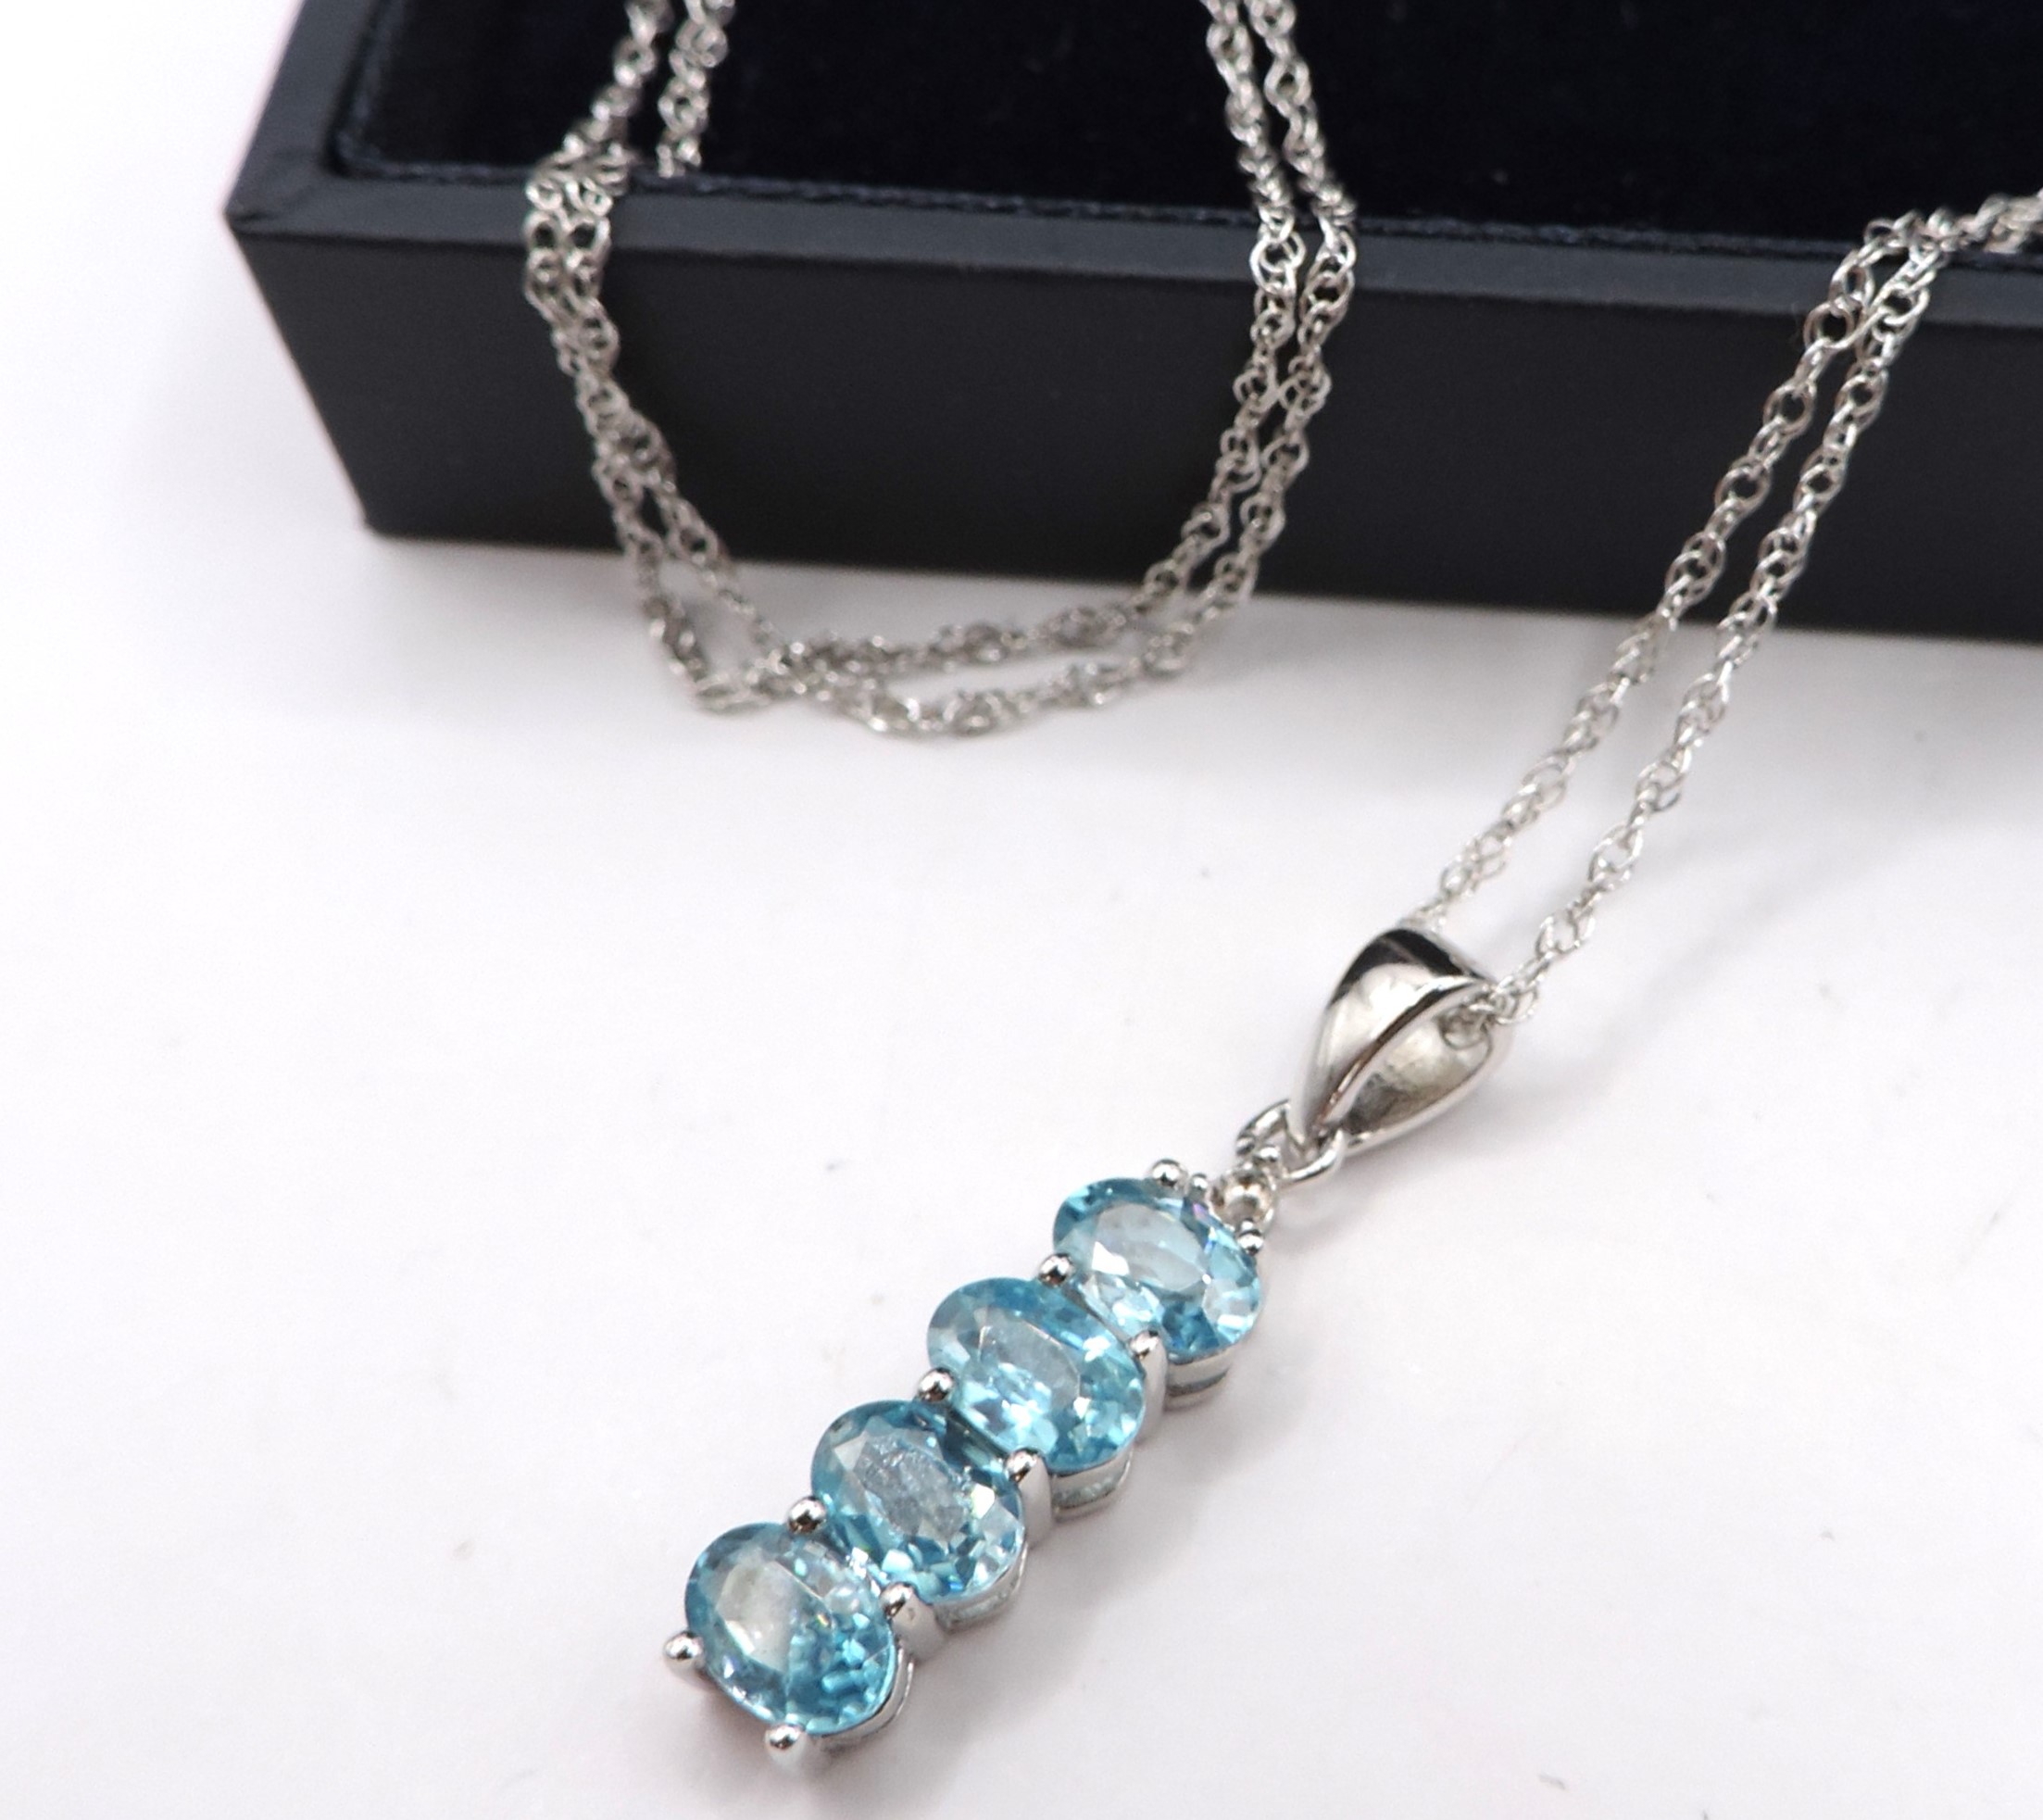 Sterling Silver Blue Topaz Pendant Necklace New with Gift Pouch - Image 2 of 2